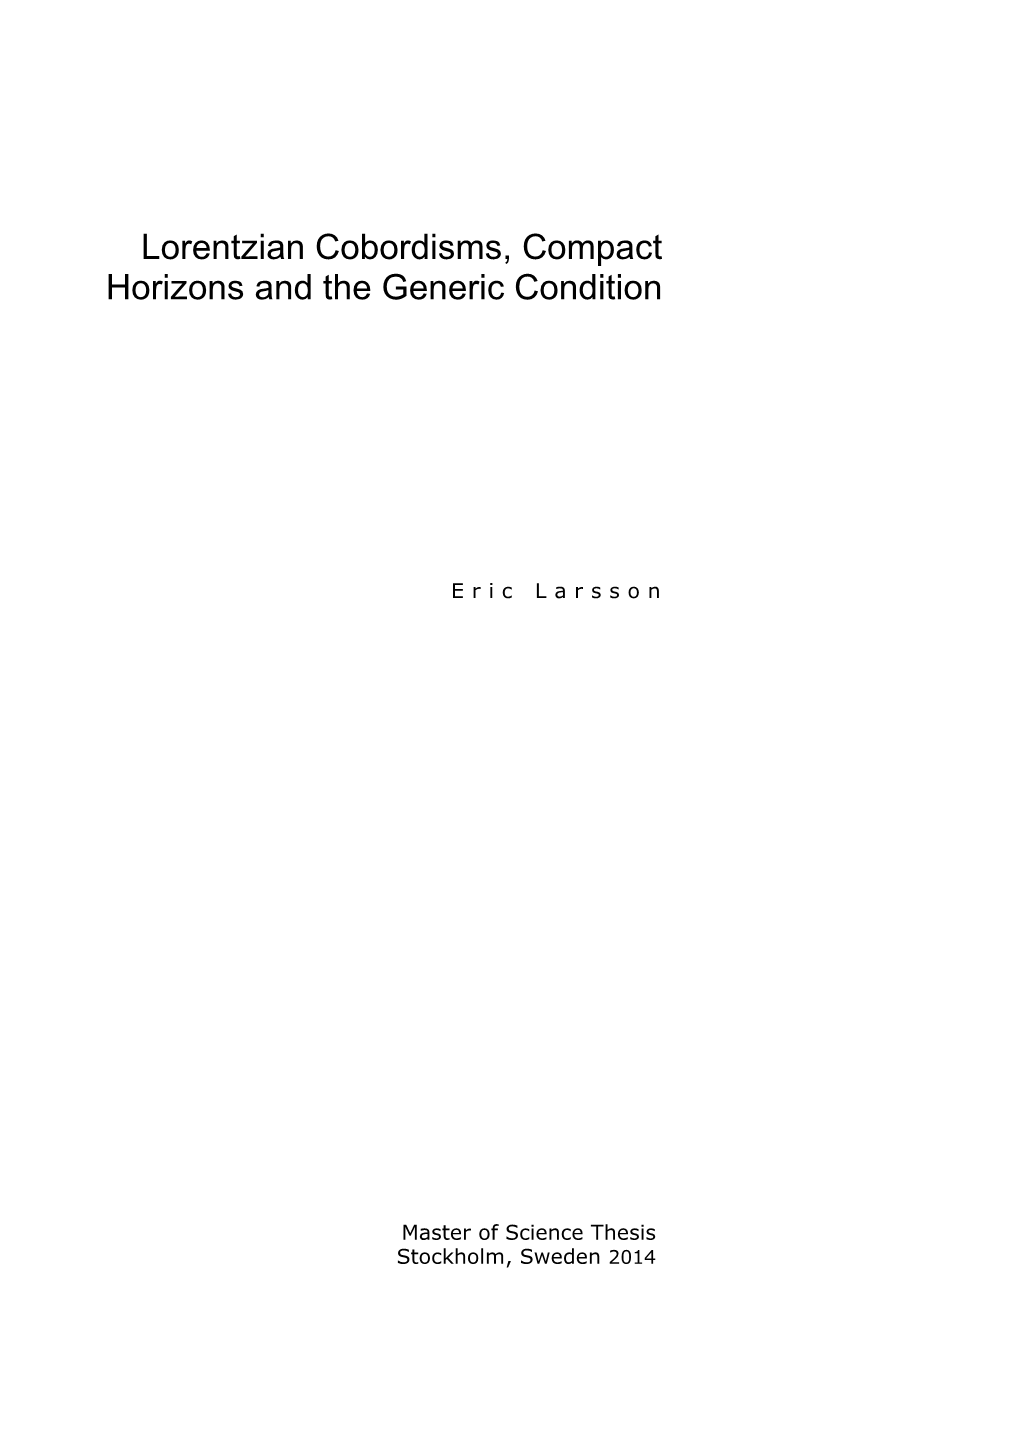 Lorentzian Cobordisms, Compact Horizons and the Generic Condition